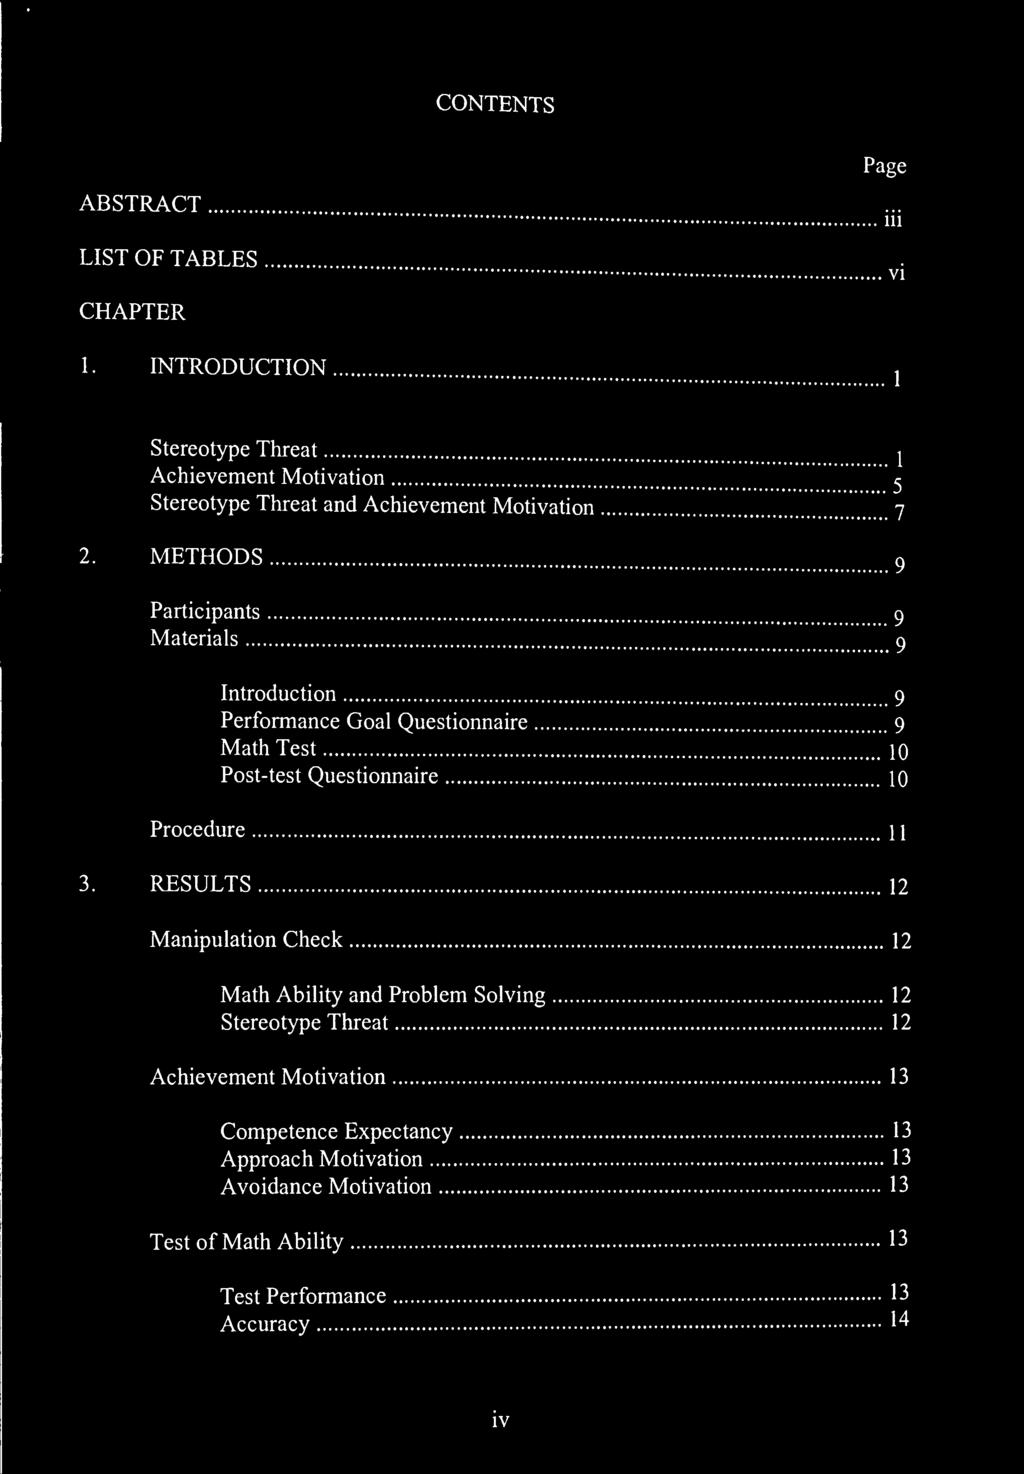 CONTENTS ABSTRACT LIST OF TABLES CHAPTER Page Ill VI L INTRODUCTION j Stereotype Threat Achievement Motivation Stereotype Threat and Achievement Motivation 7 _ j 5 2.